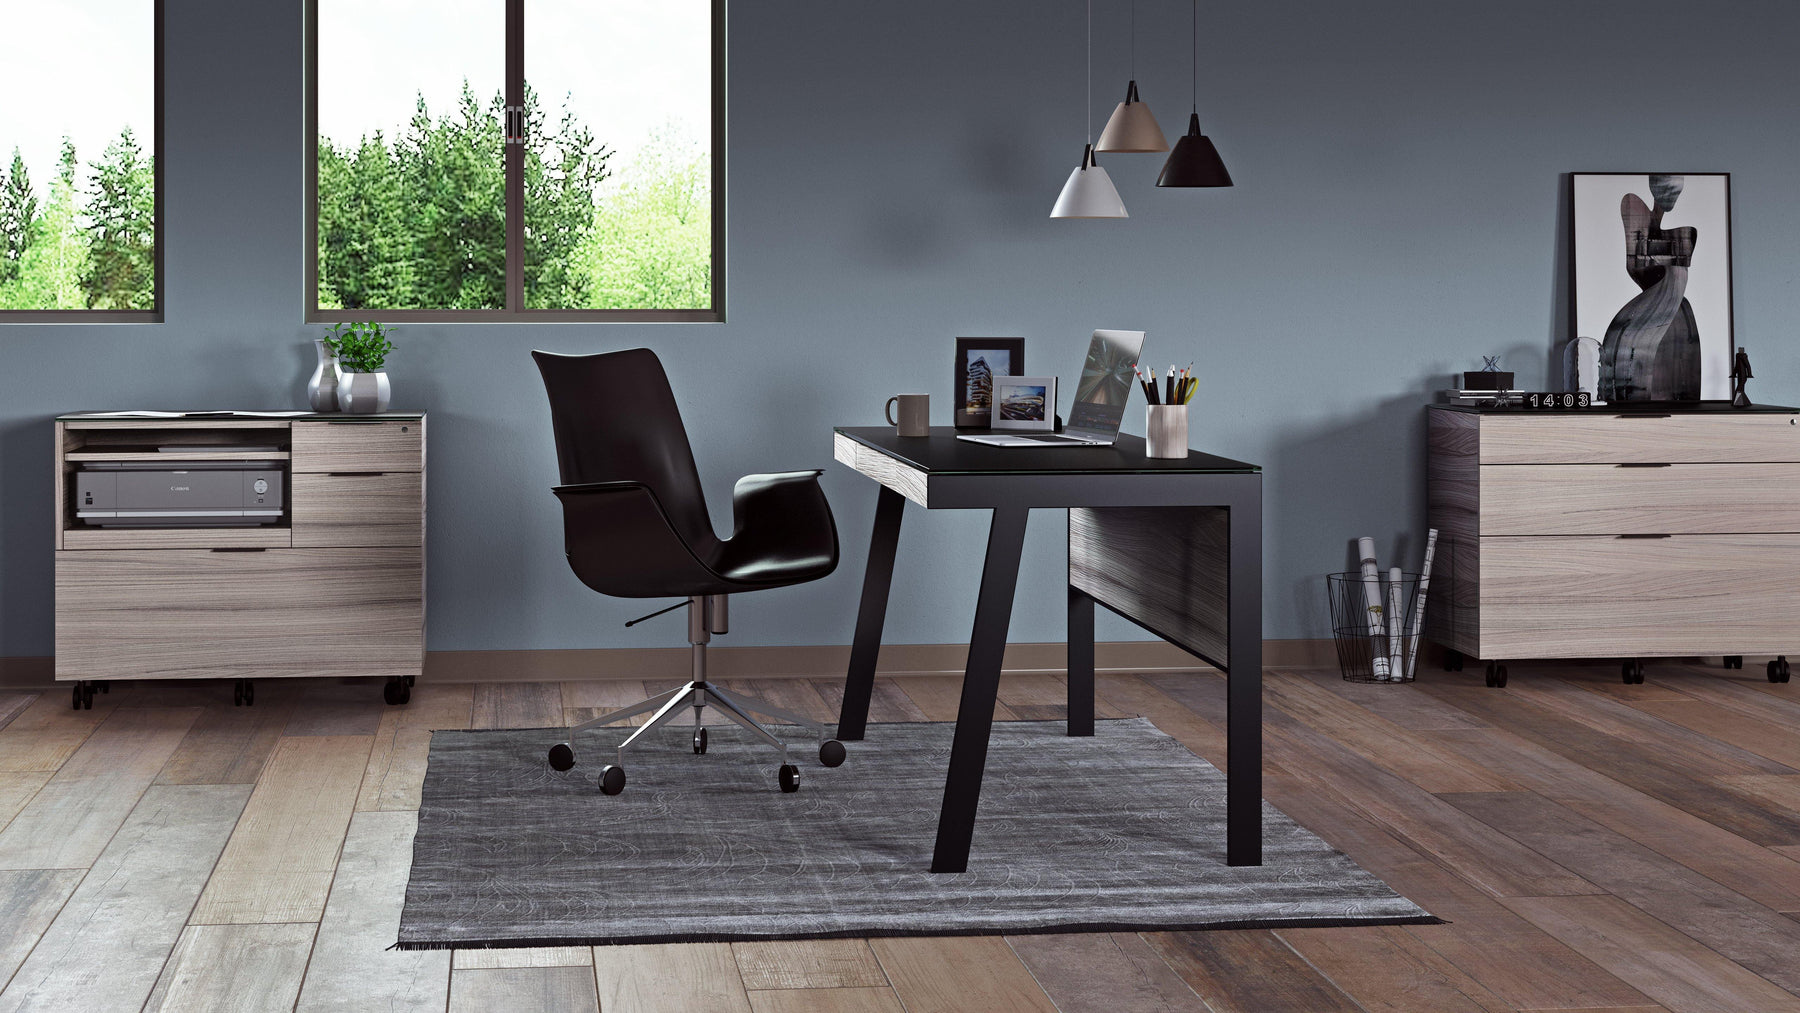 Home Office - Tips for Better Organization - Rapport Furniture